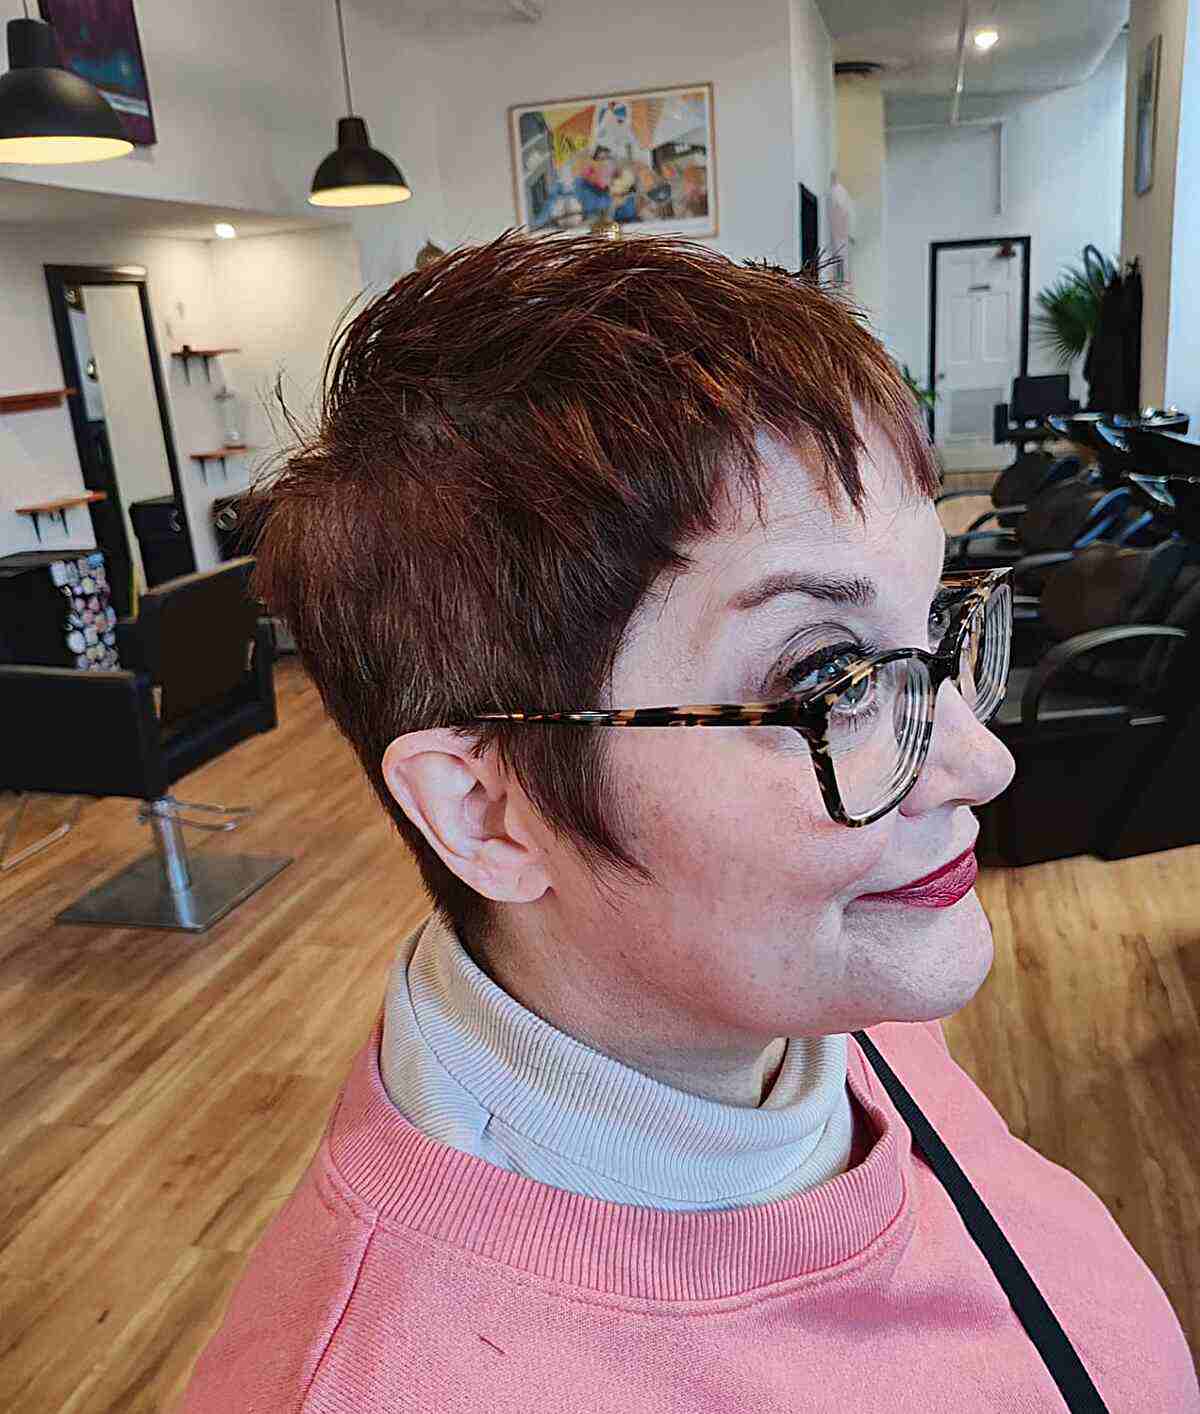 Piece-y Bangs on Short Crop Pixie Cut for Women Aged 50 with Glasses